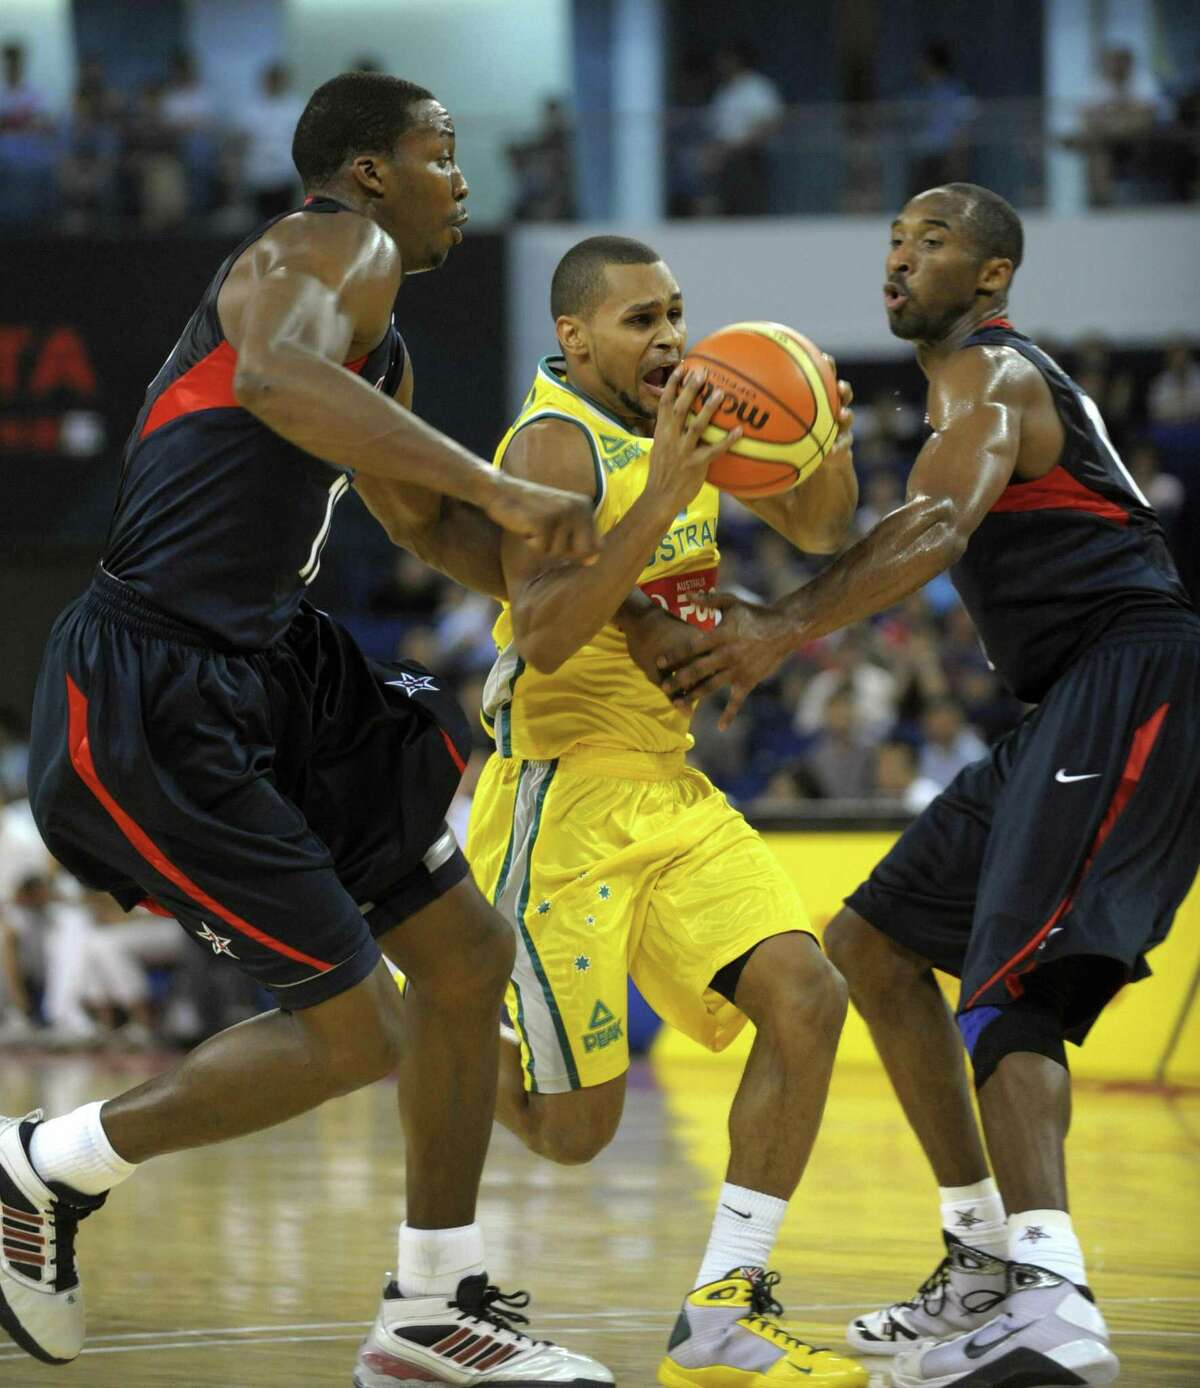 Mills, shown during the 2008 Olympics, said he never forgot Bryant’s generosity as he forged his own successful career.